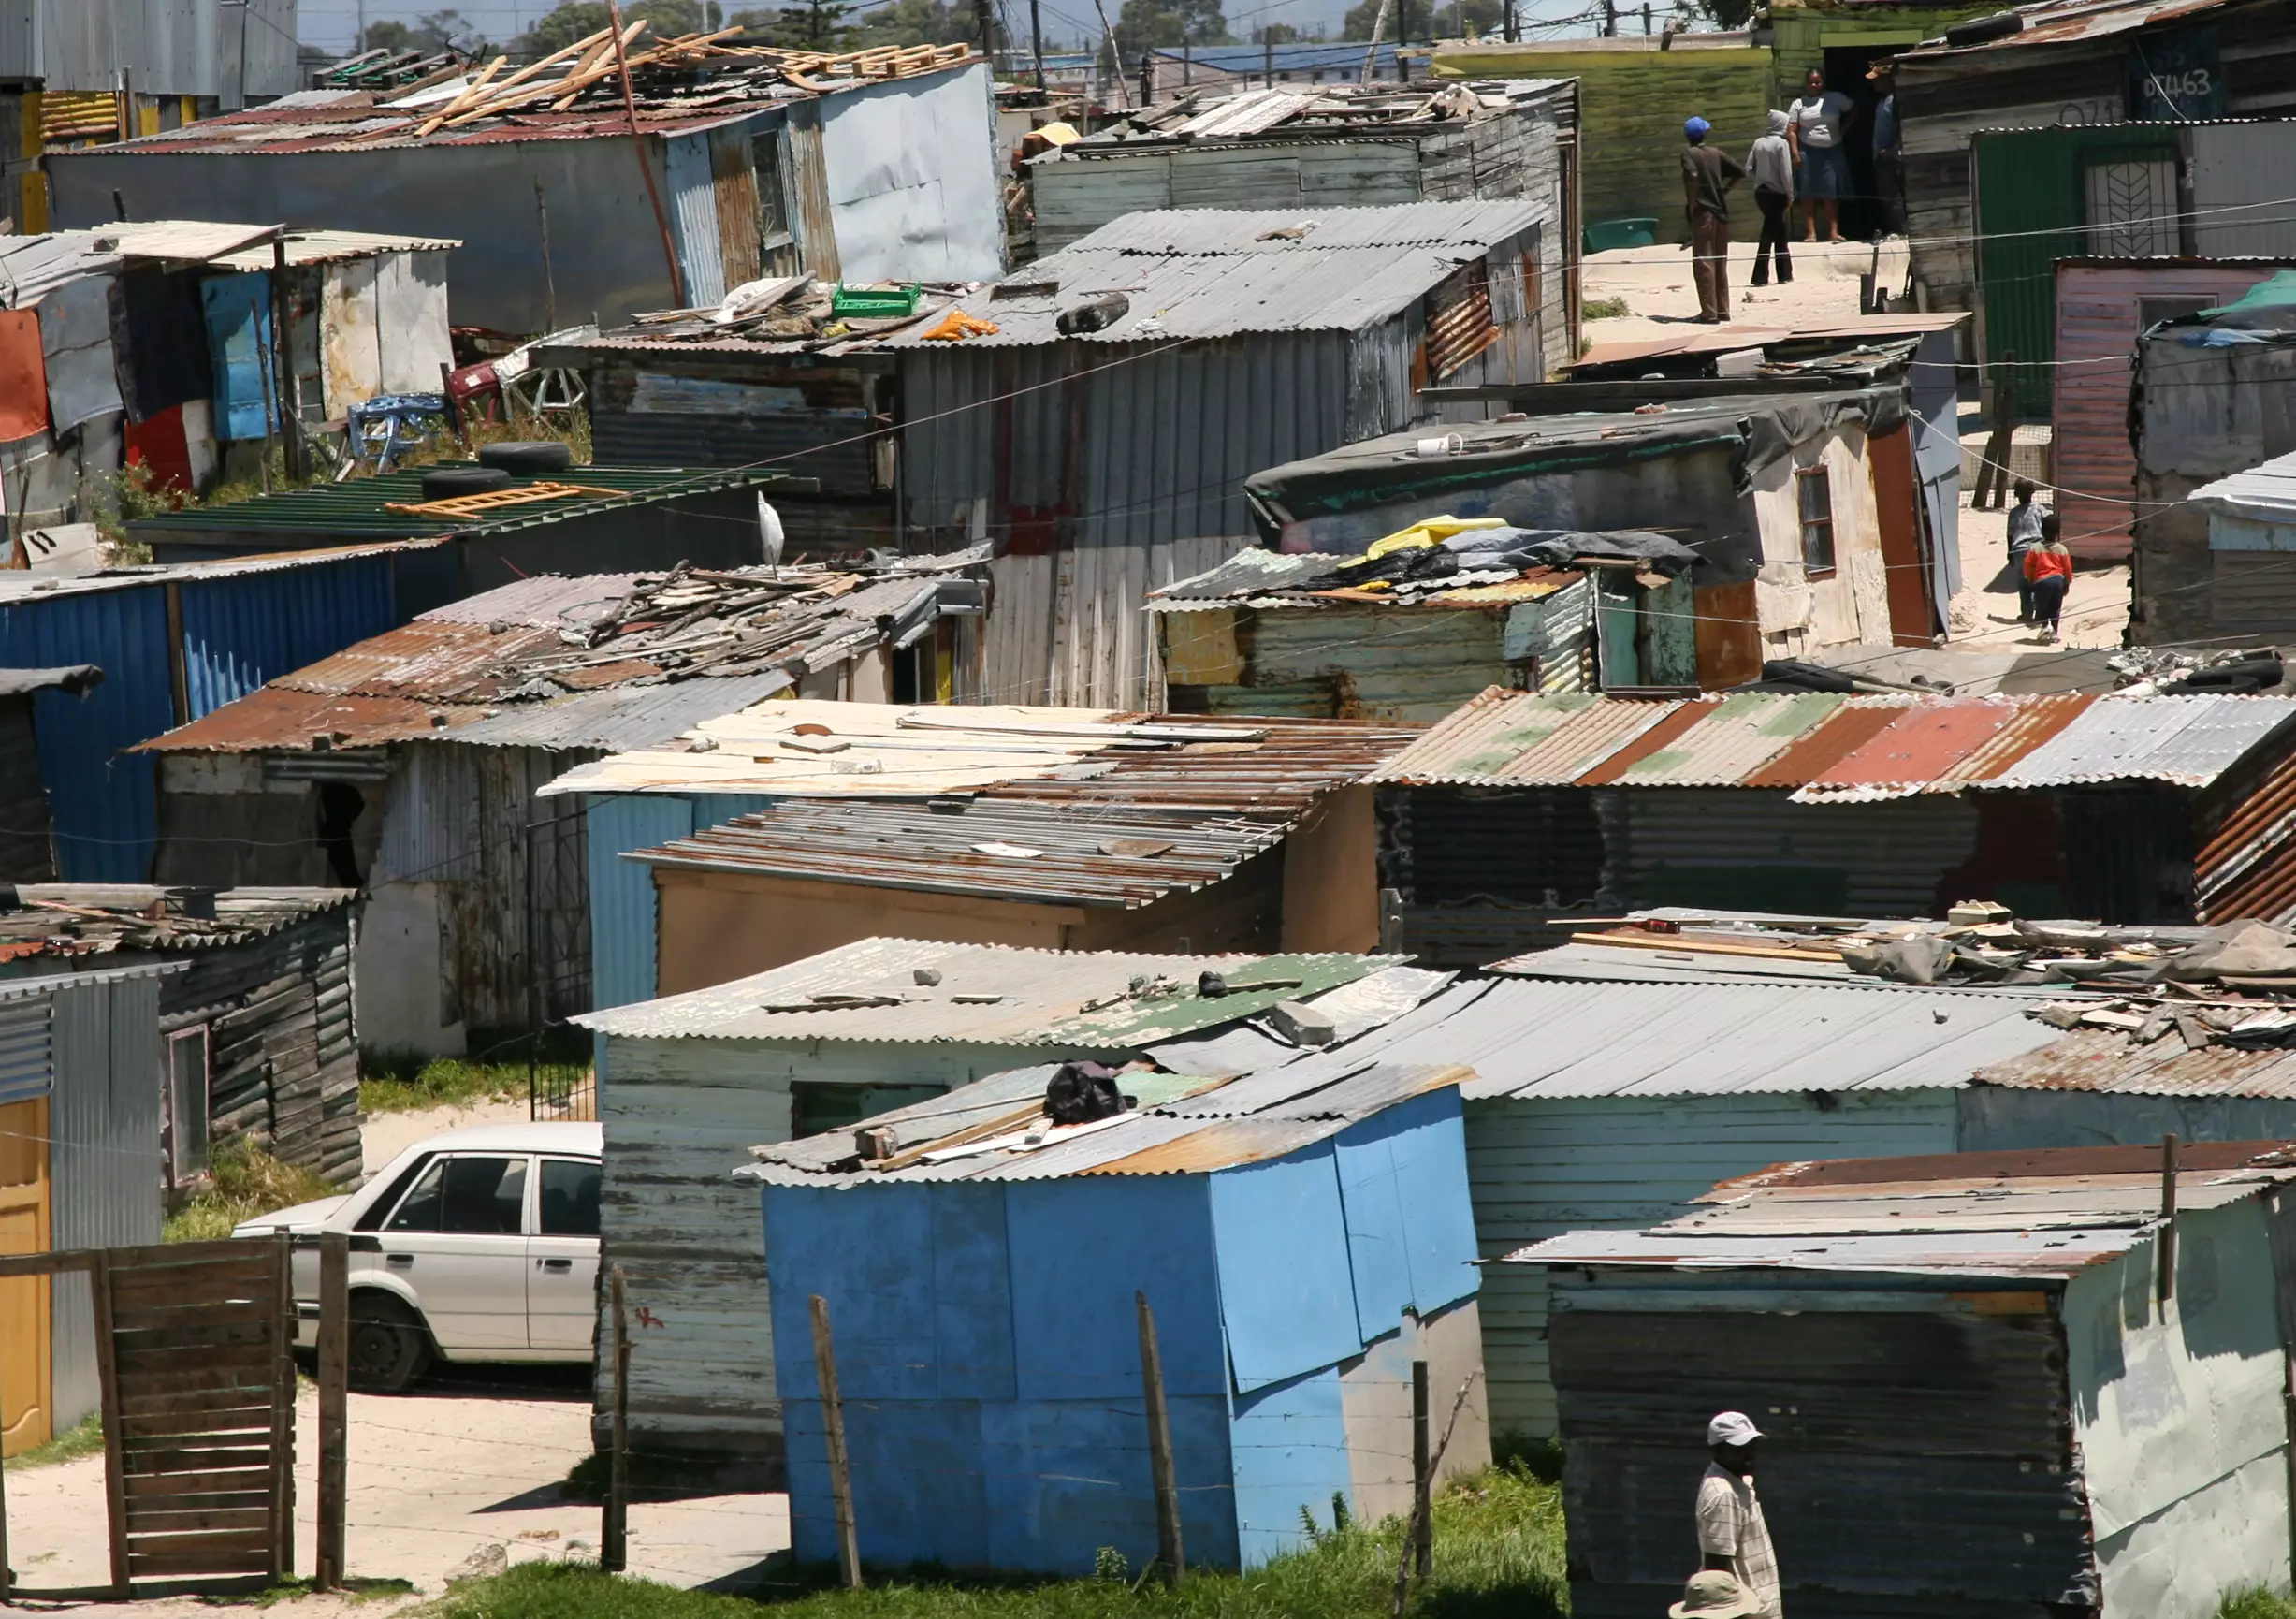 Khayelitsha township is not known for being the safest place.